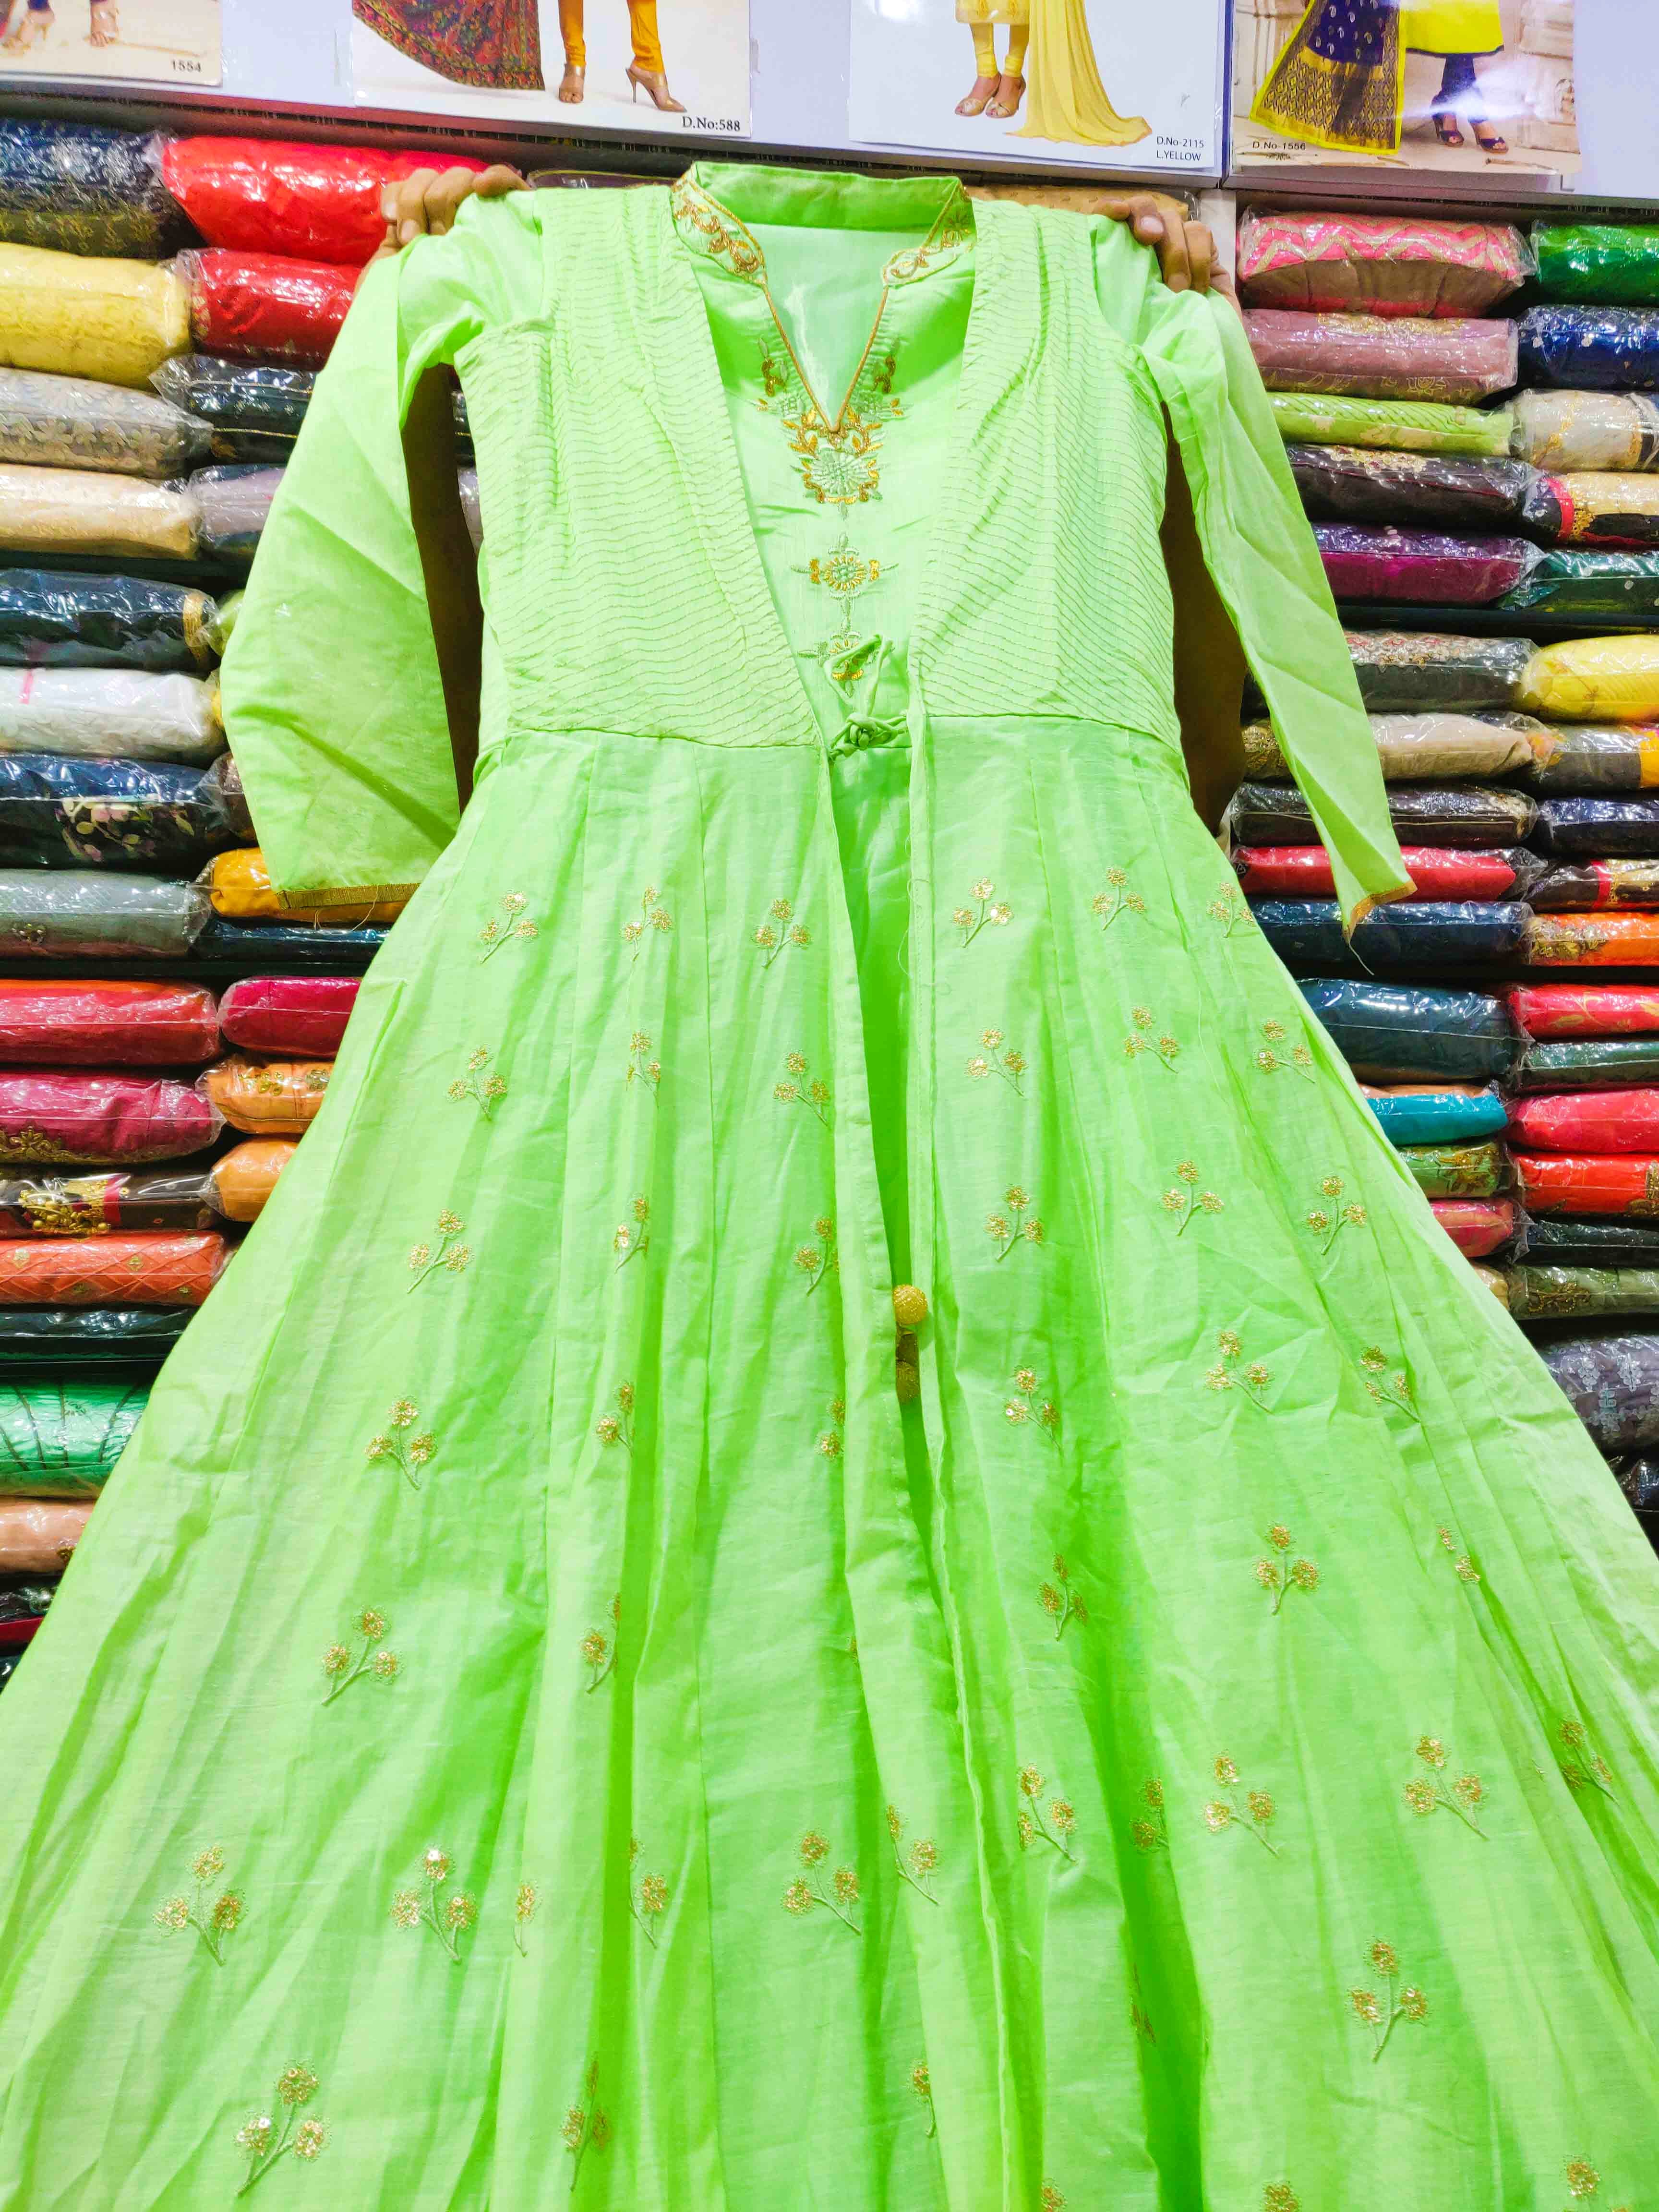 Green,Clothing,Dress,Yellow,Shoulder,Gown,Fashion,Costume design,Fashion design,Outerwear